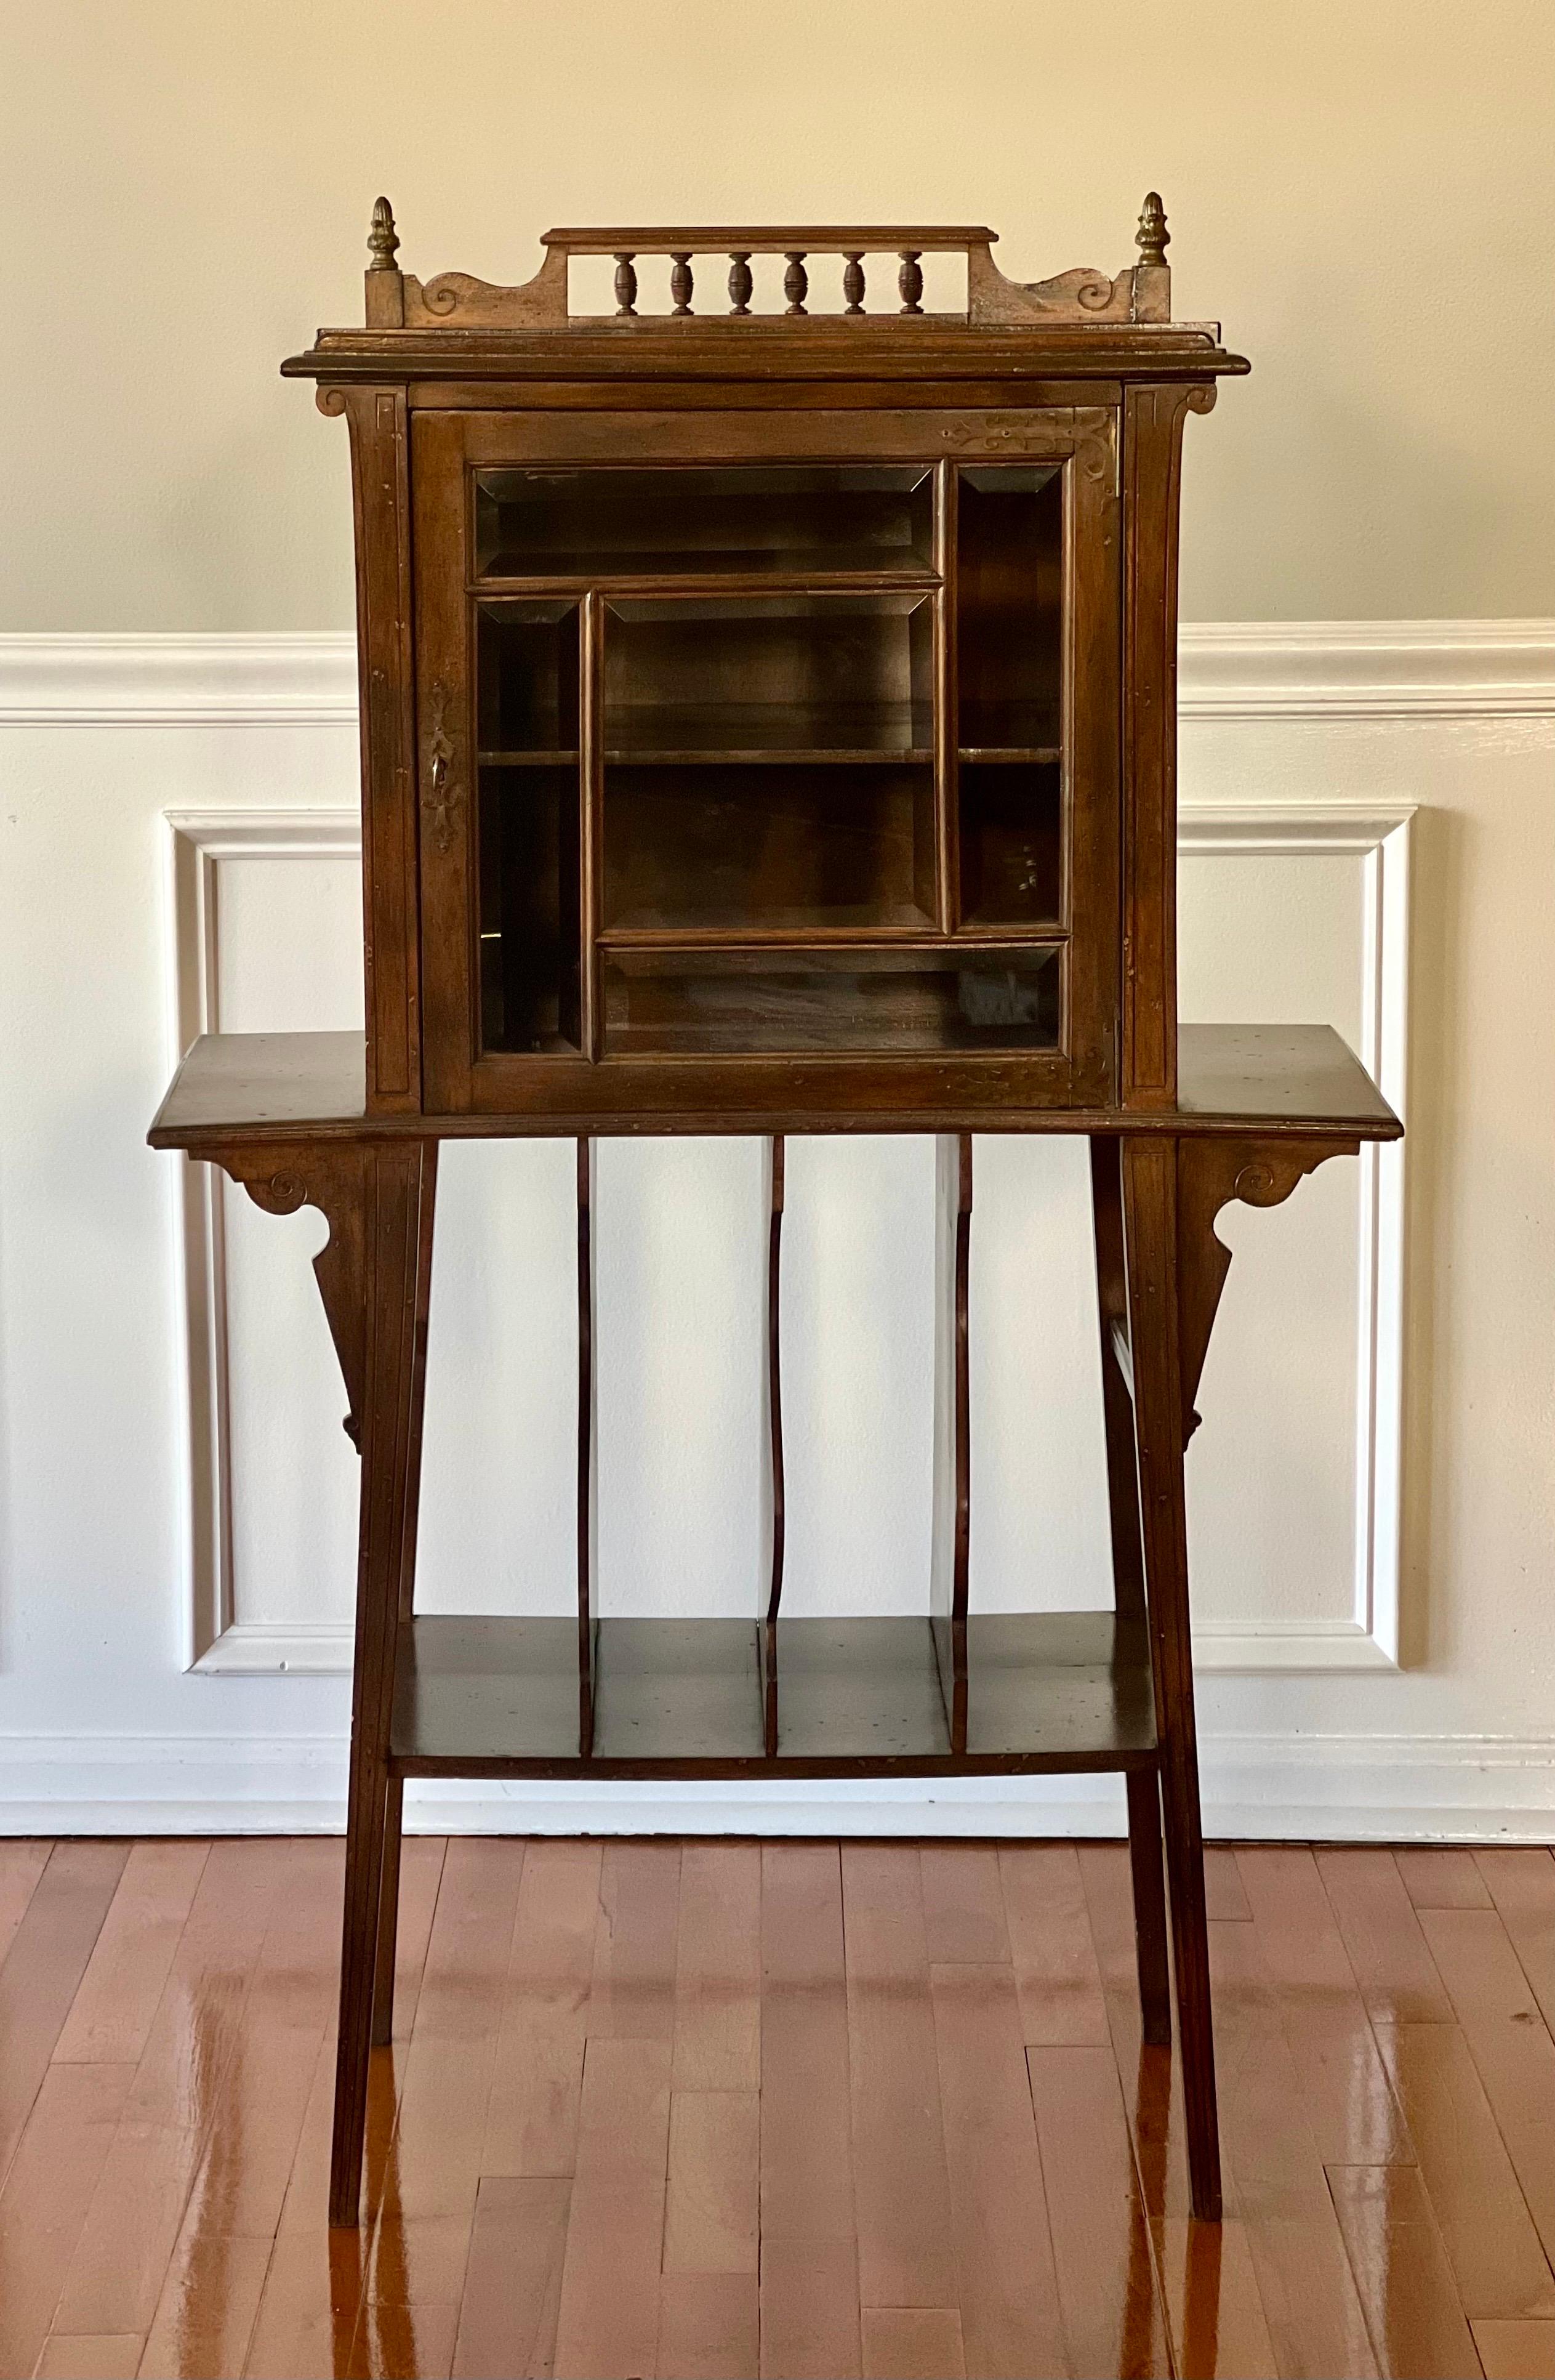 Late Victorian walnut music Canterbury cabinet with stand, early 20th century.

Set upon straight splayed legs, this charming stand features a lower partitioned shelf, six-pane beveled glass door and galleried top with bronze finials. The interior